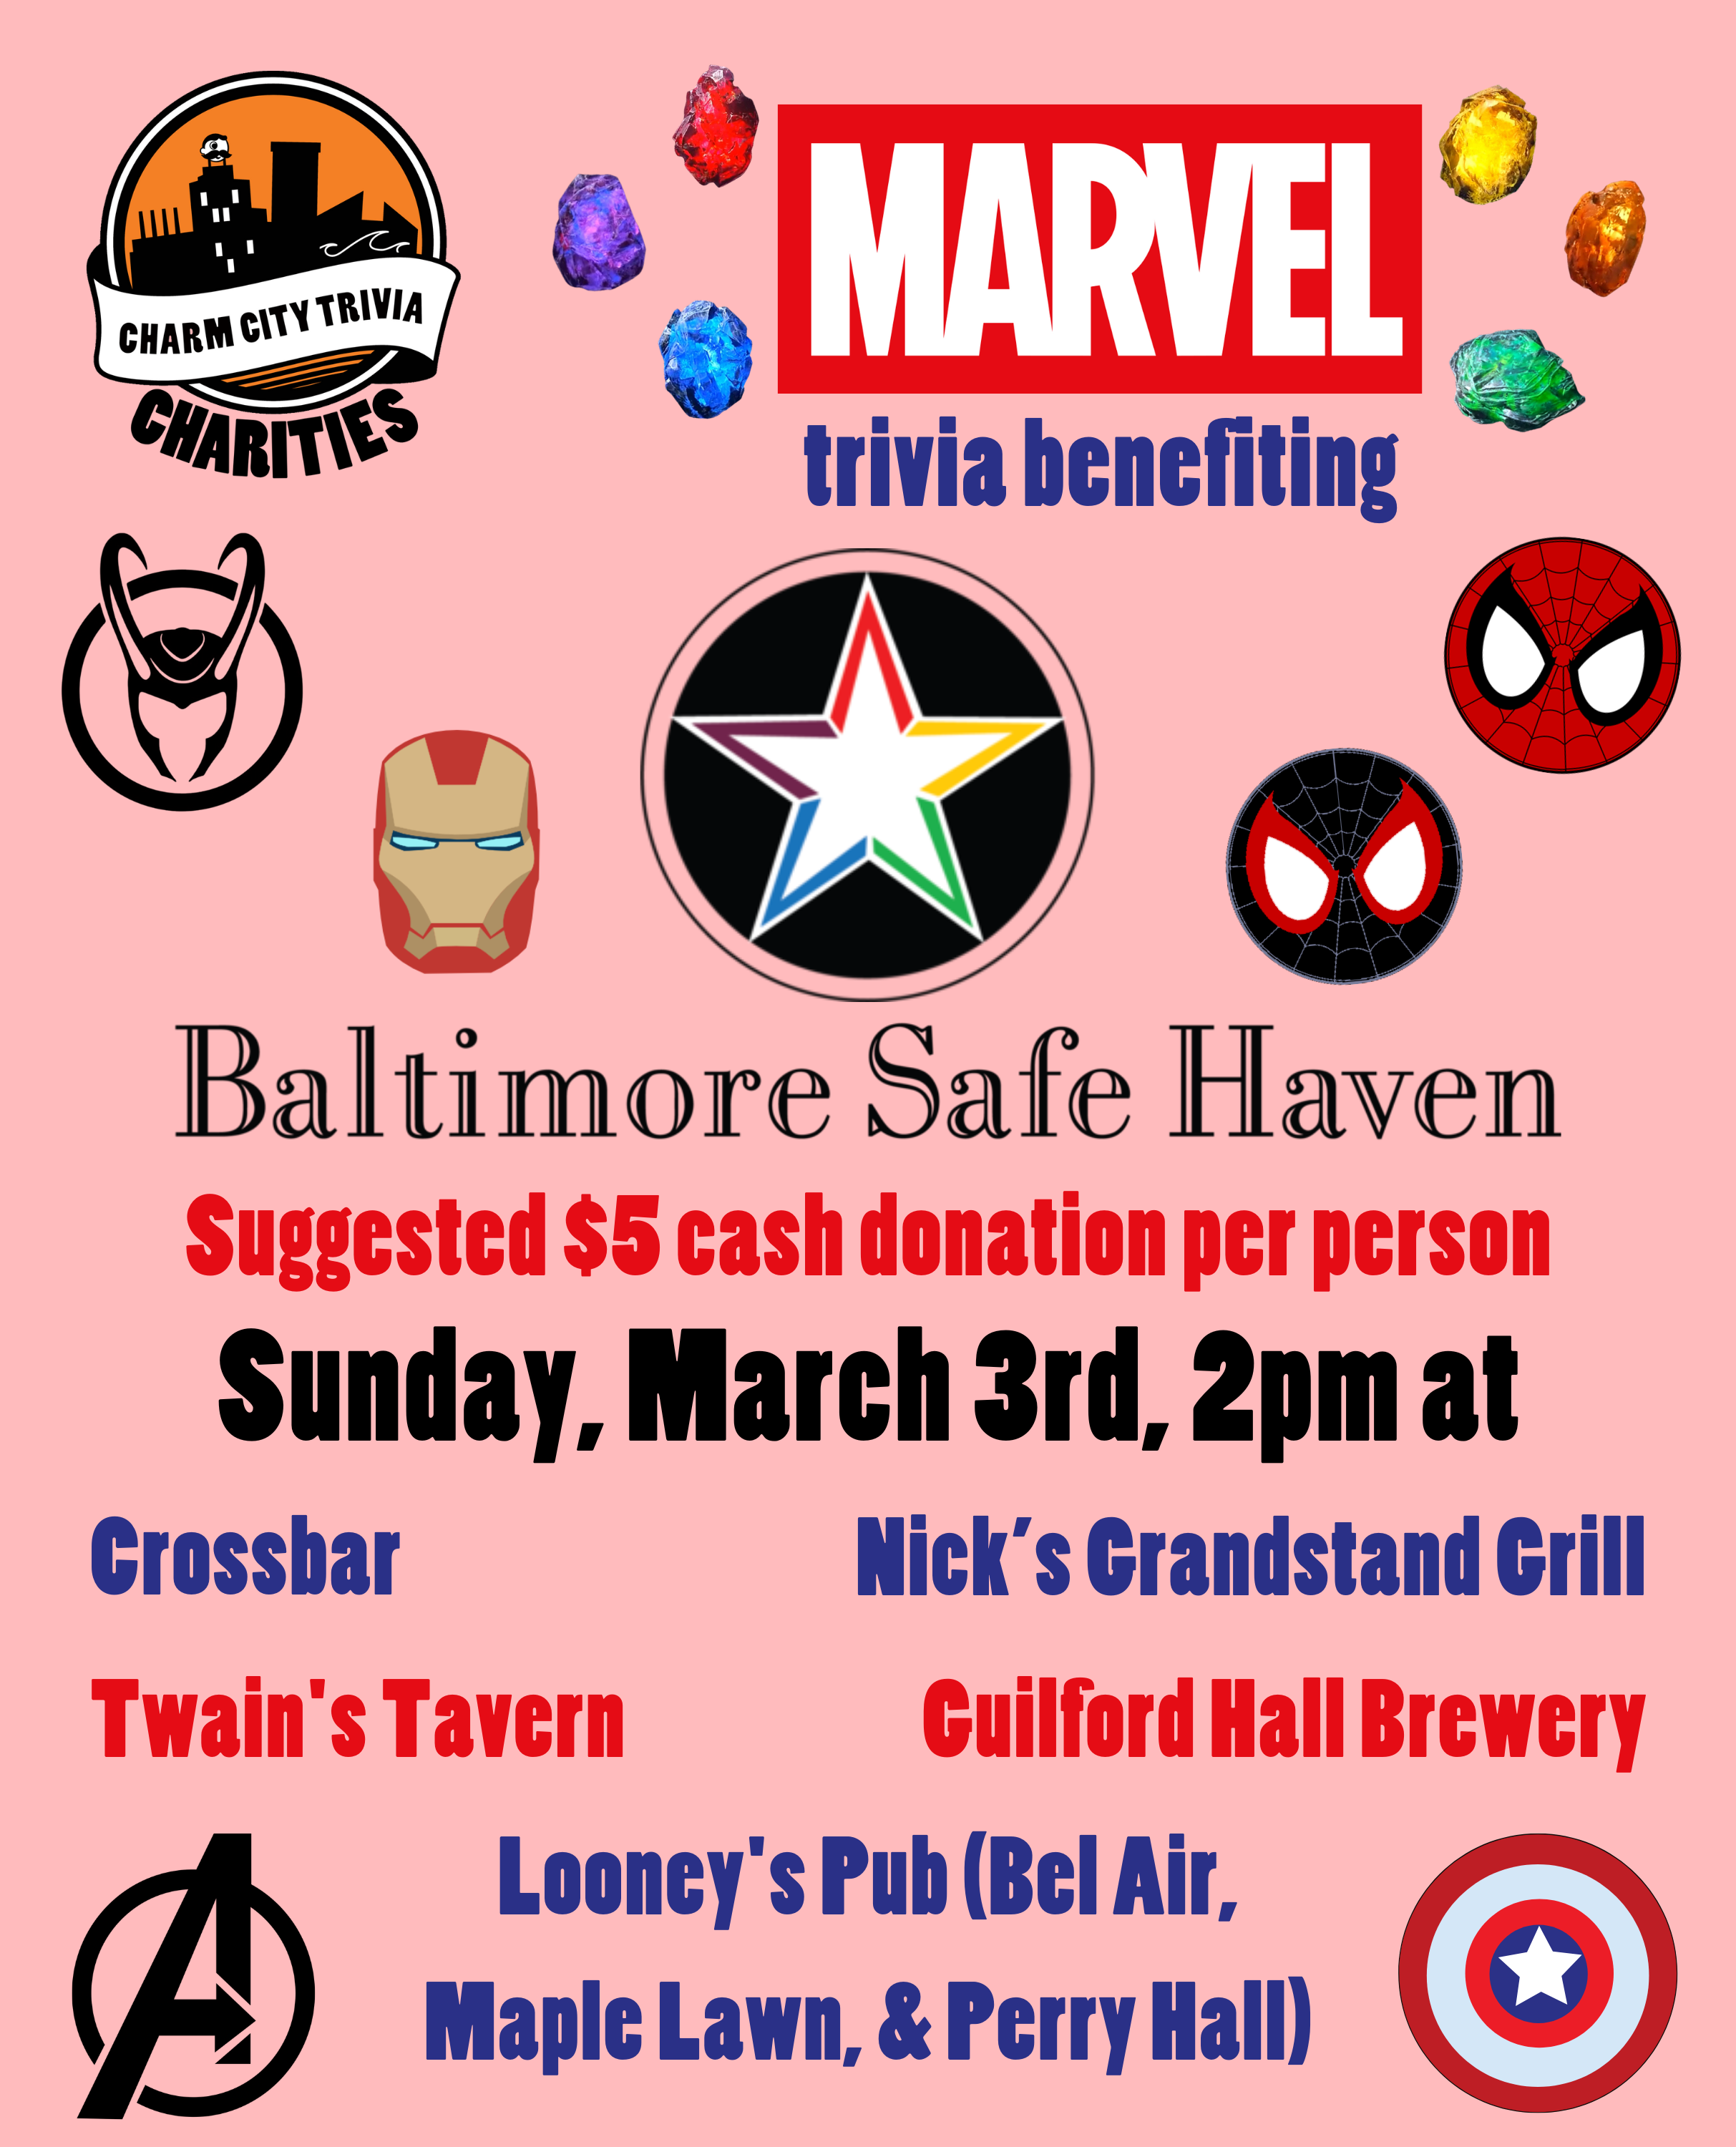 a pink background with the Charm City Trivia Charities logo, the Baltimore Safe Haven logo, the Marvel logo, the infinity stones, Loki's helm, Iron Man's helmet, Peter Parker's & Miles Morales' Spider-Man masks, the Avengers logo, Captain America's shield, and dark blue, red, and black text. The text reads: Marvel trivia benefiting Baltimore Safe Haven. Suggested $5 cash donation per person. Sunday, March 3rd, 2pm at. Crossbar. Guilford Hall Brewery. Nick's Grandstand Grill. Twain's Tavern. Looney's Pub (Bel Air, Maple Lawn, & Perry Hall)